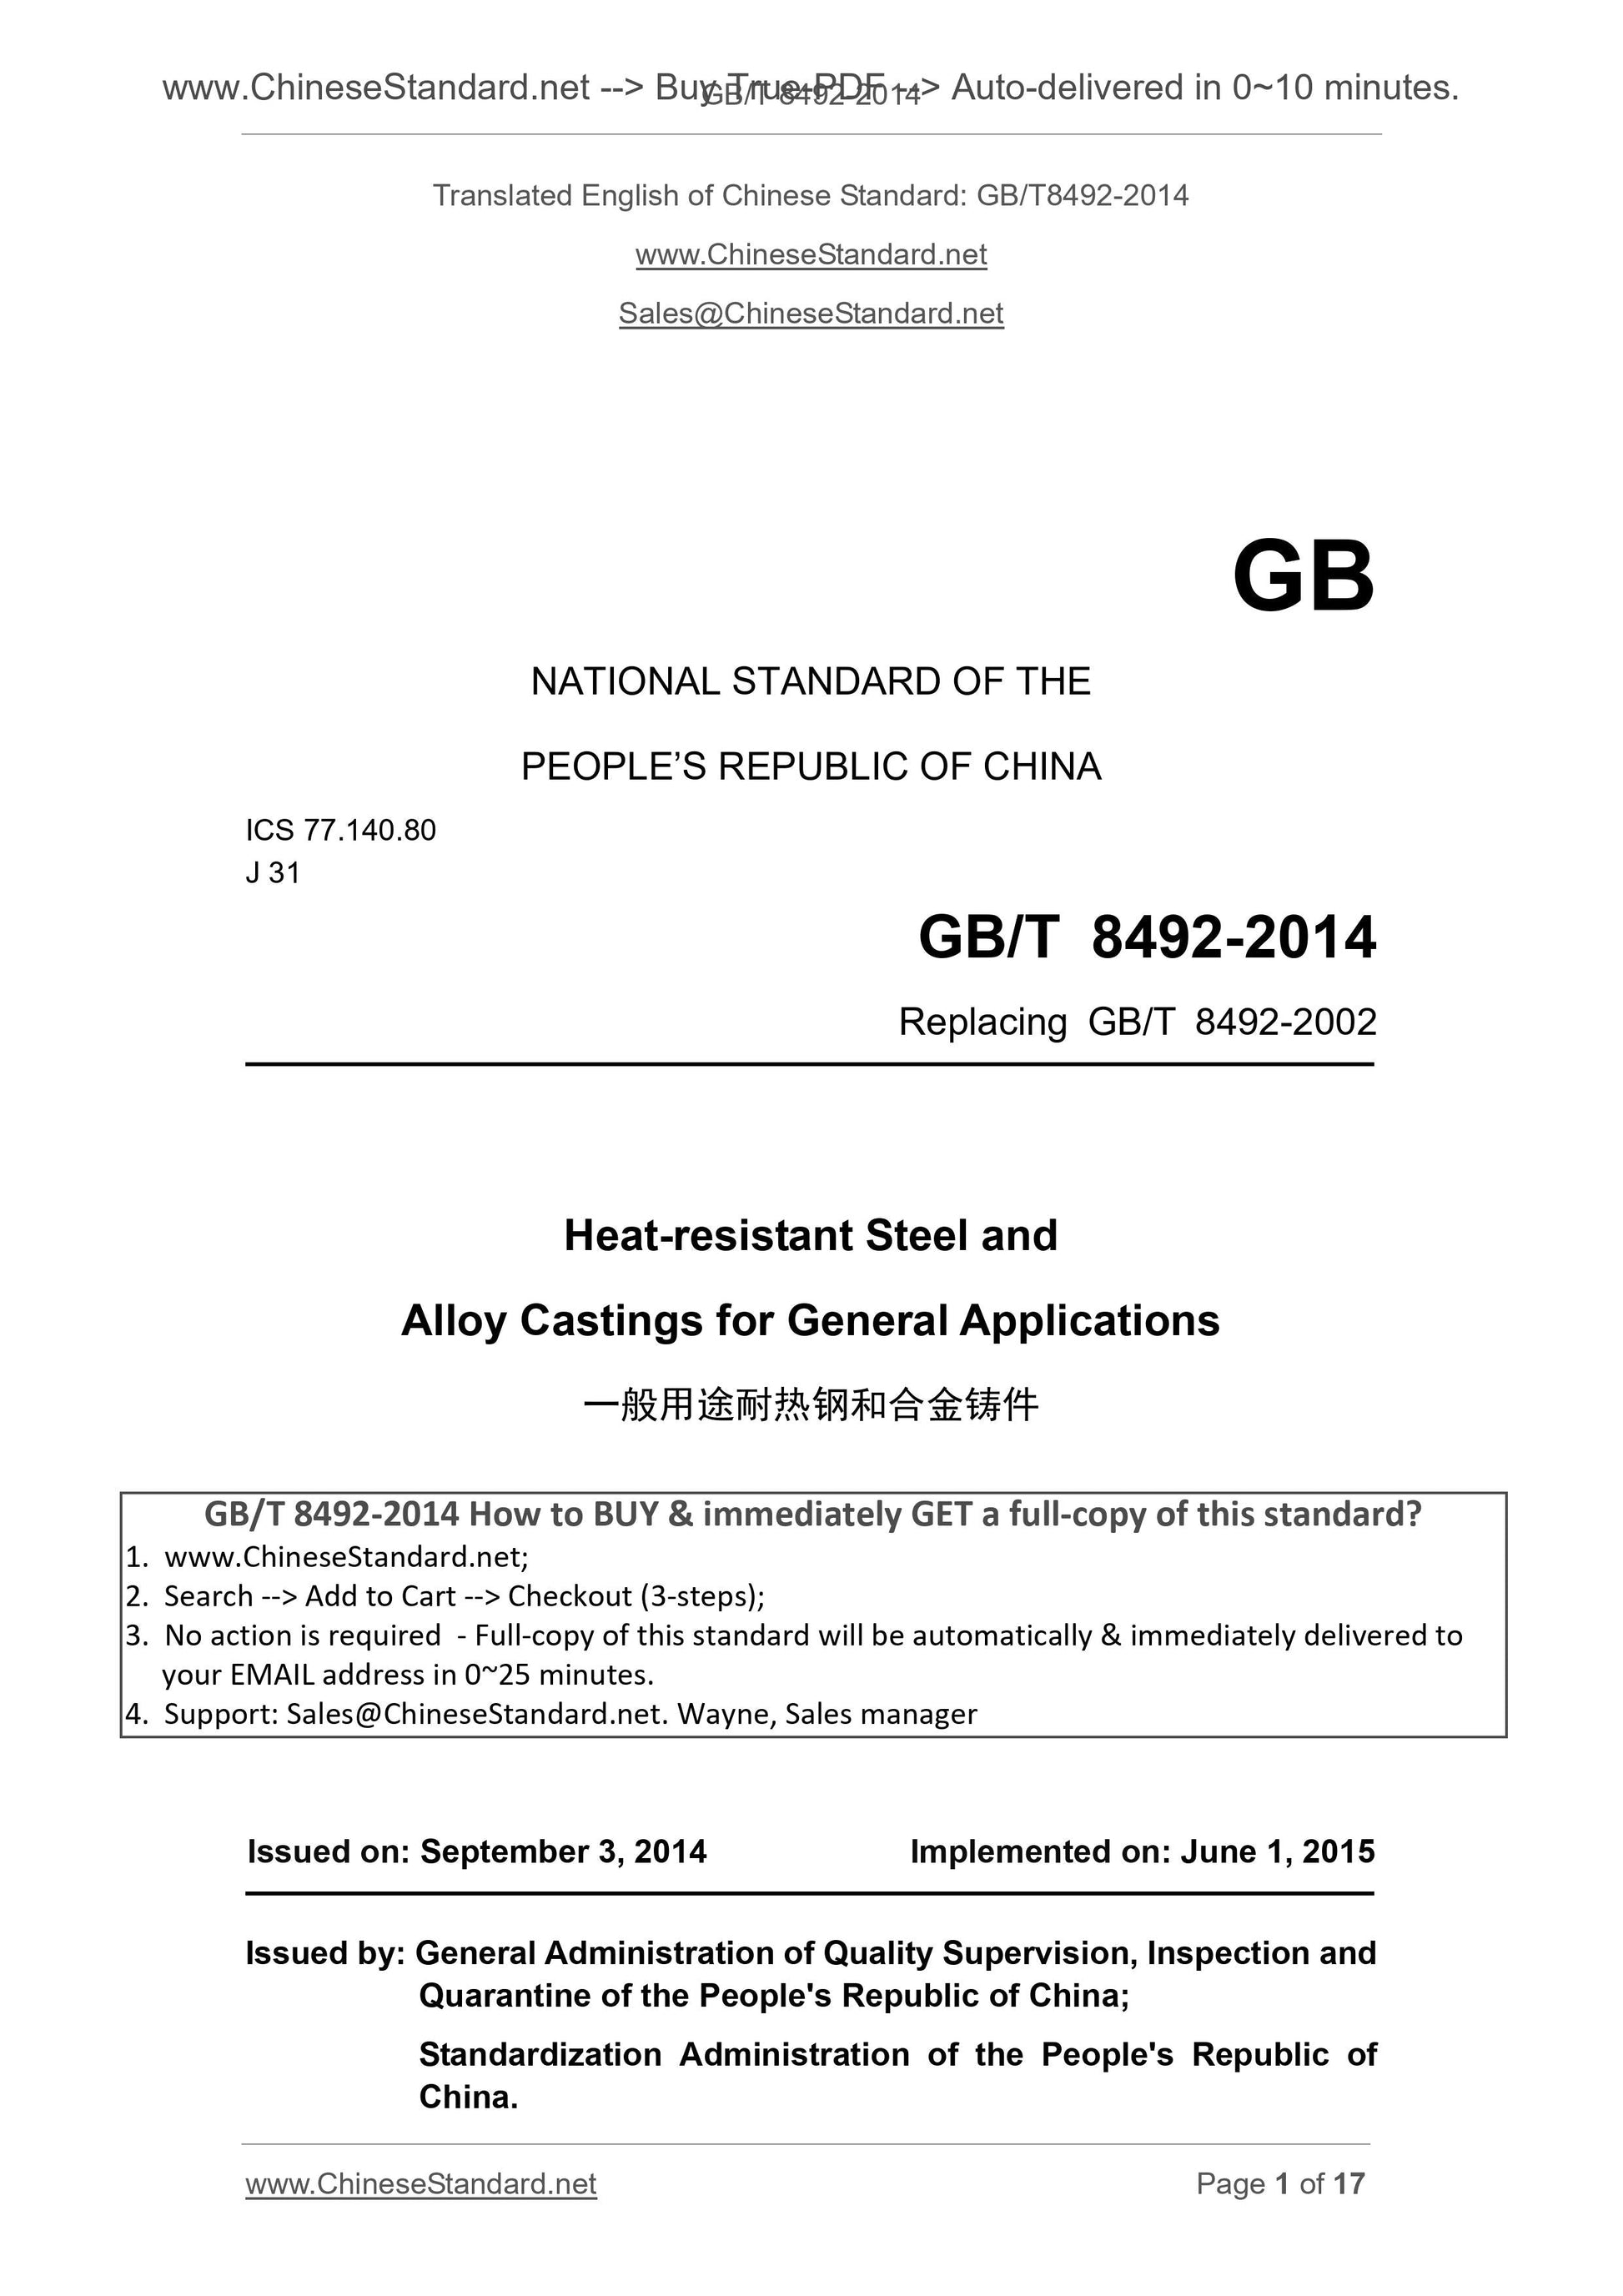 GB/T 8492-2014 Page 1